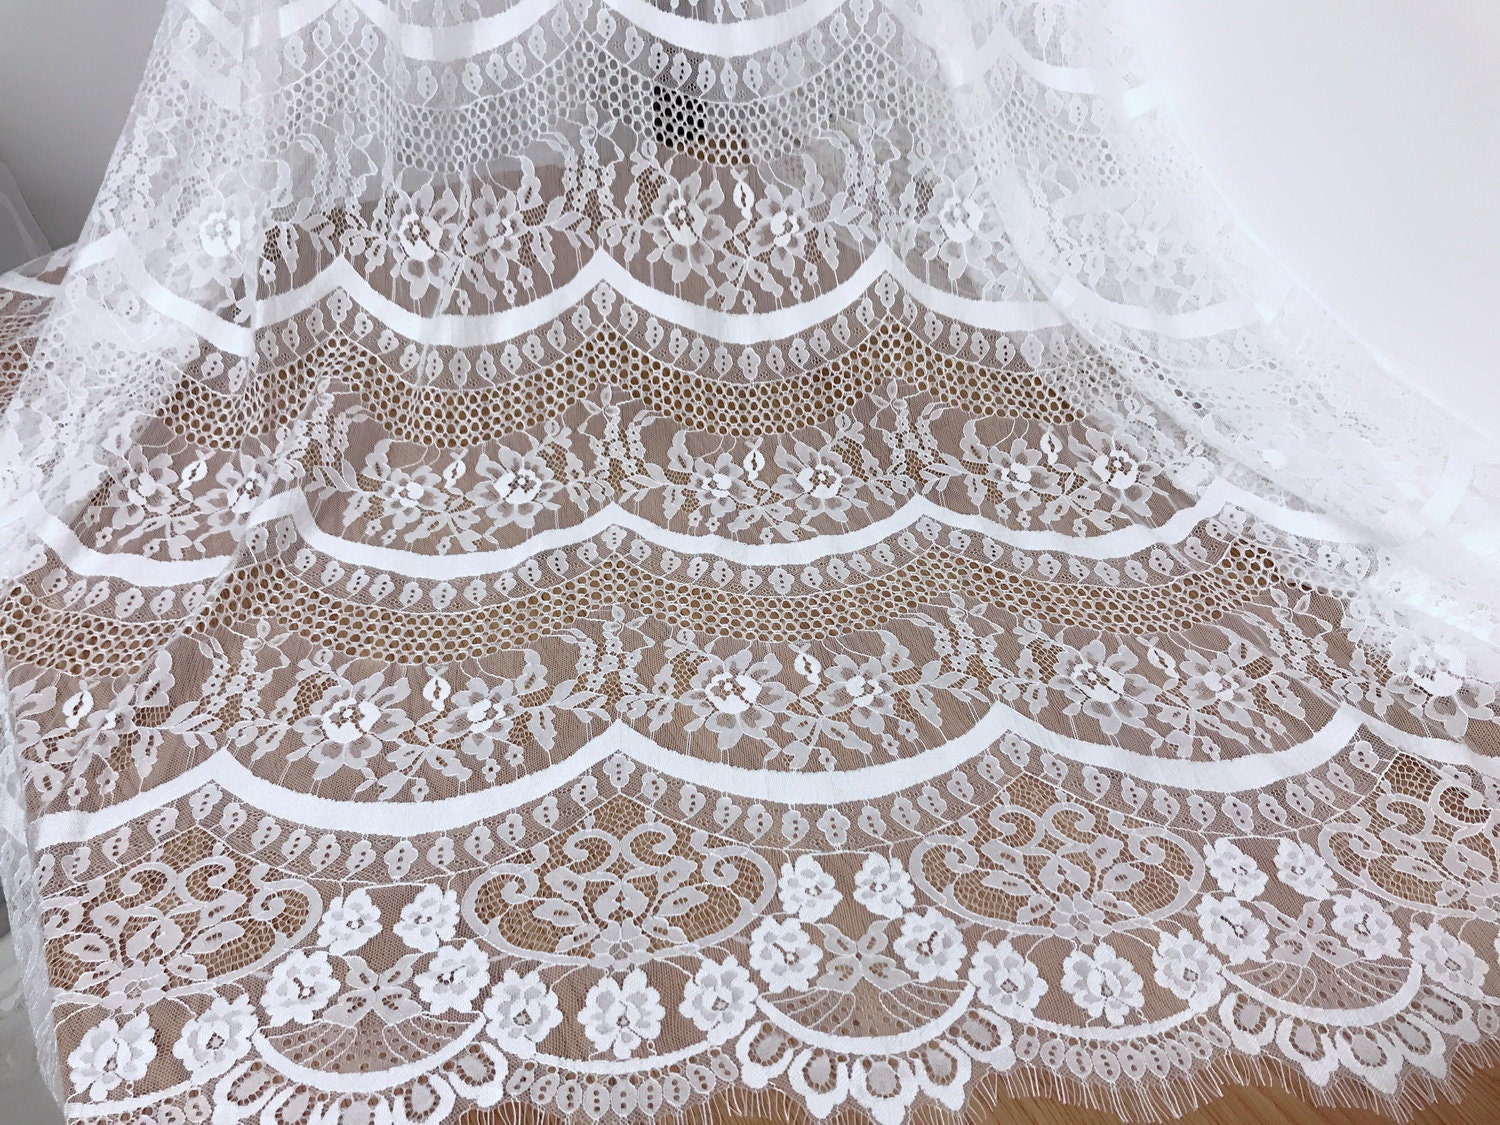 Off White Scalloped Edge Chantilly Lace Fabric for Boho Dress - Etsy